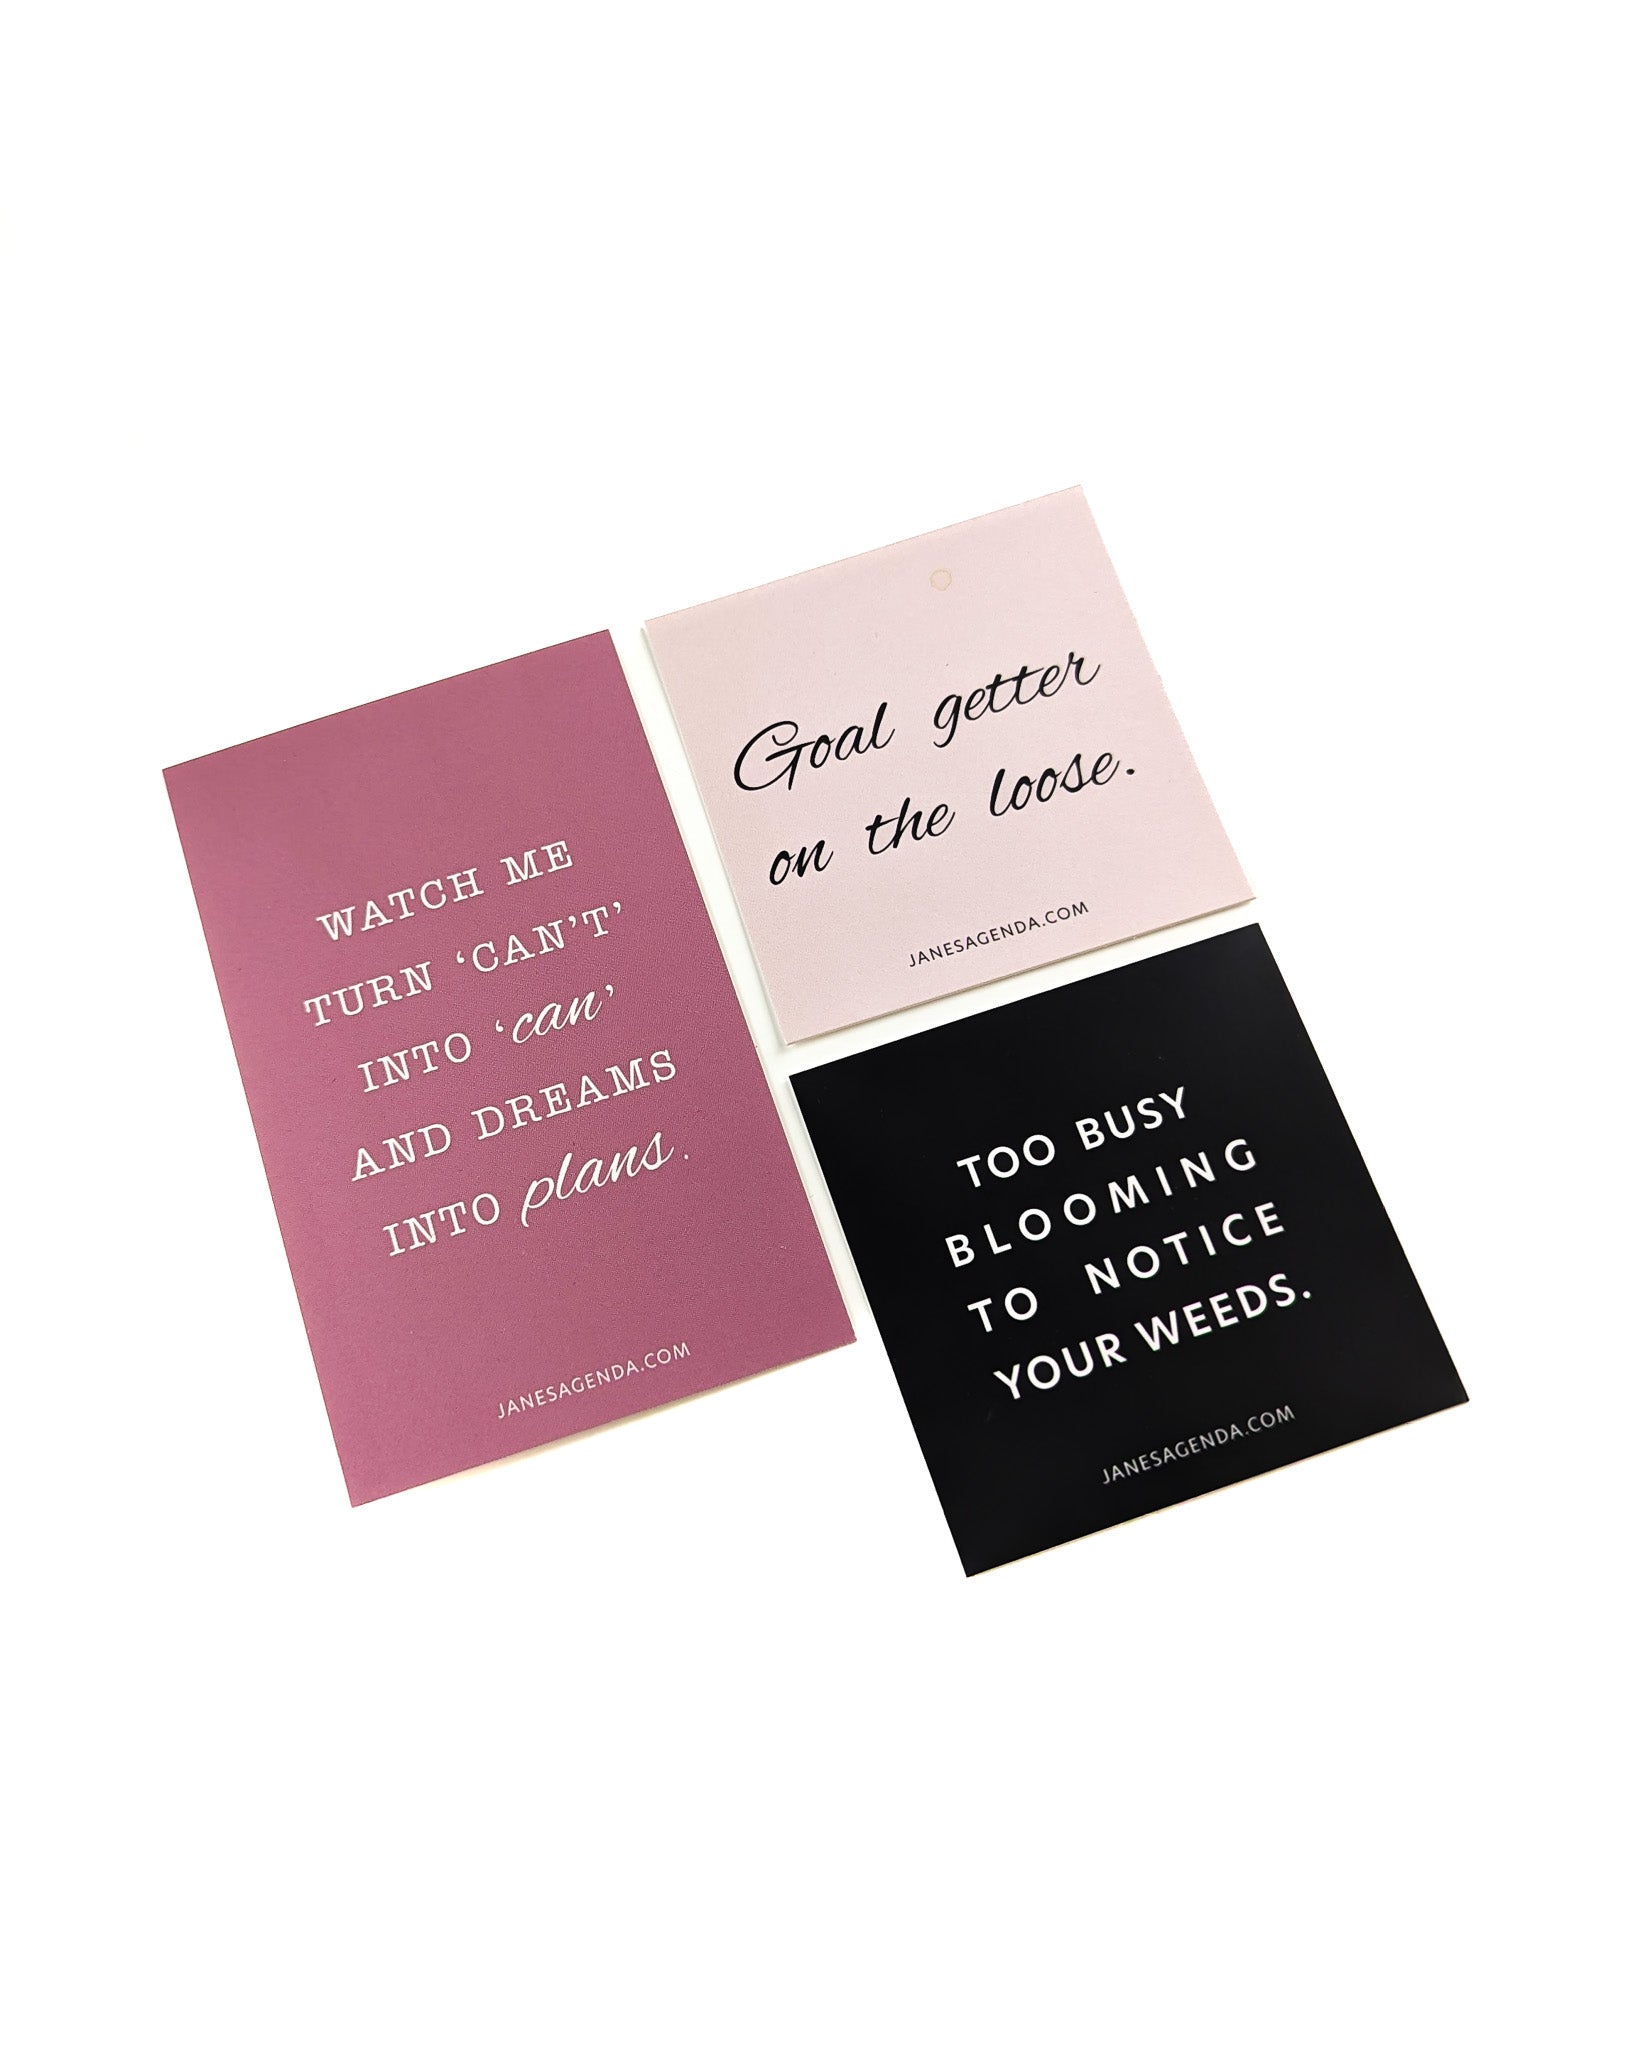 Inspirational quote cards by Jane's Agenda.